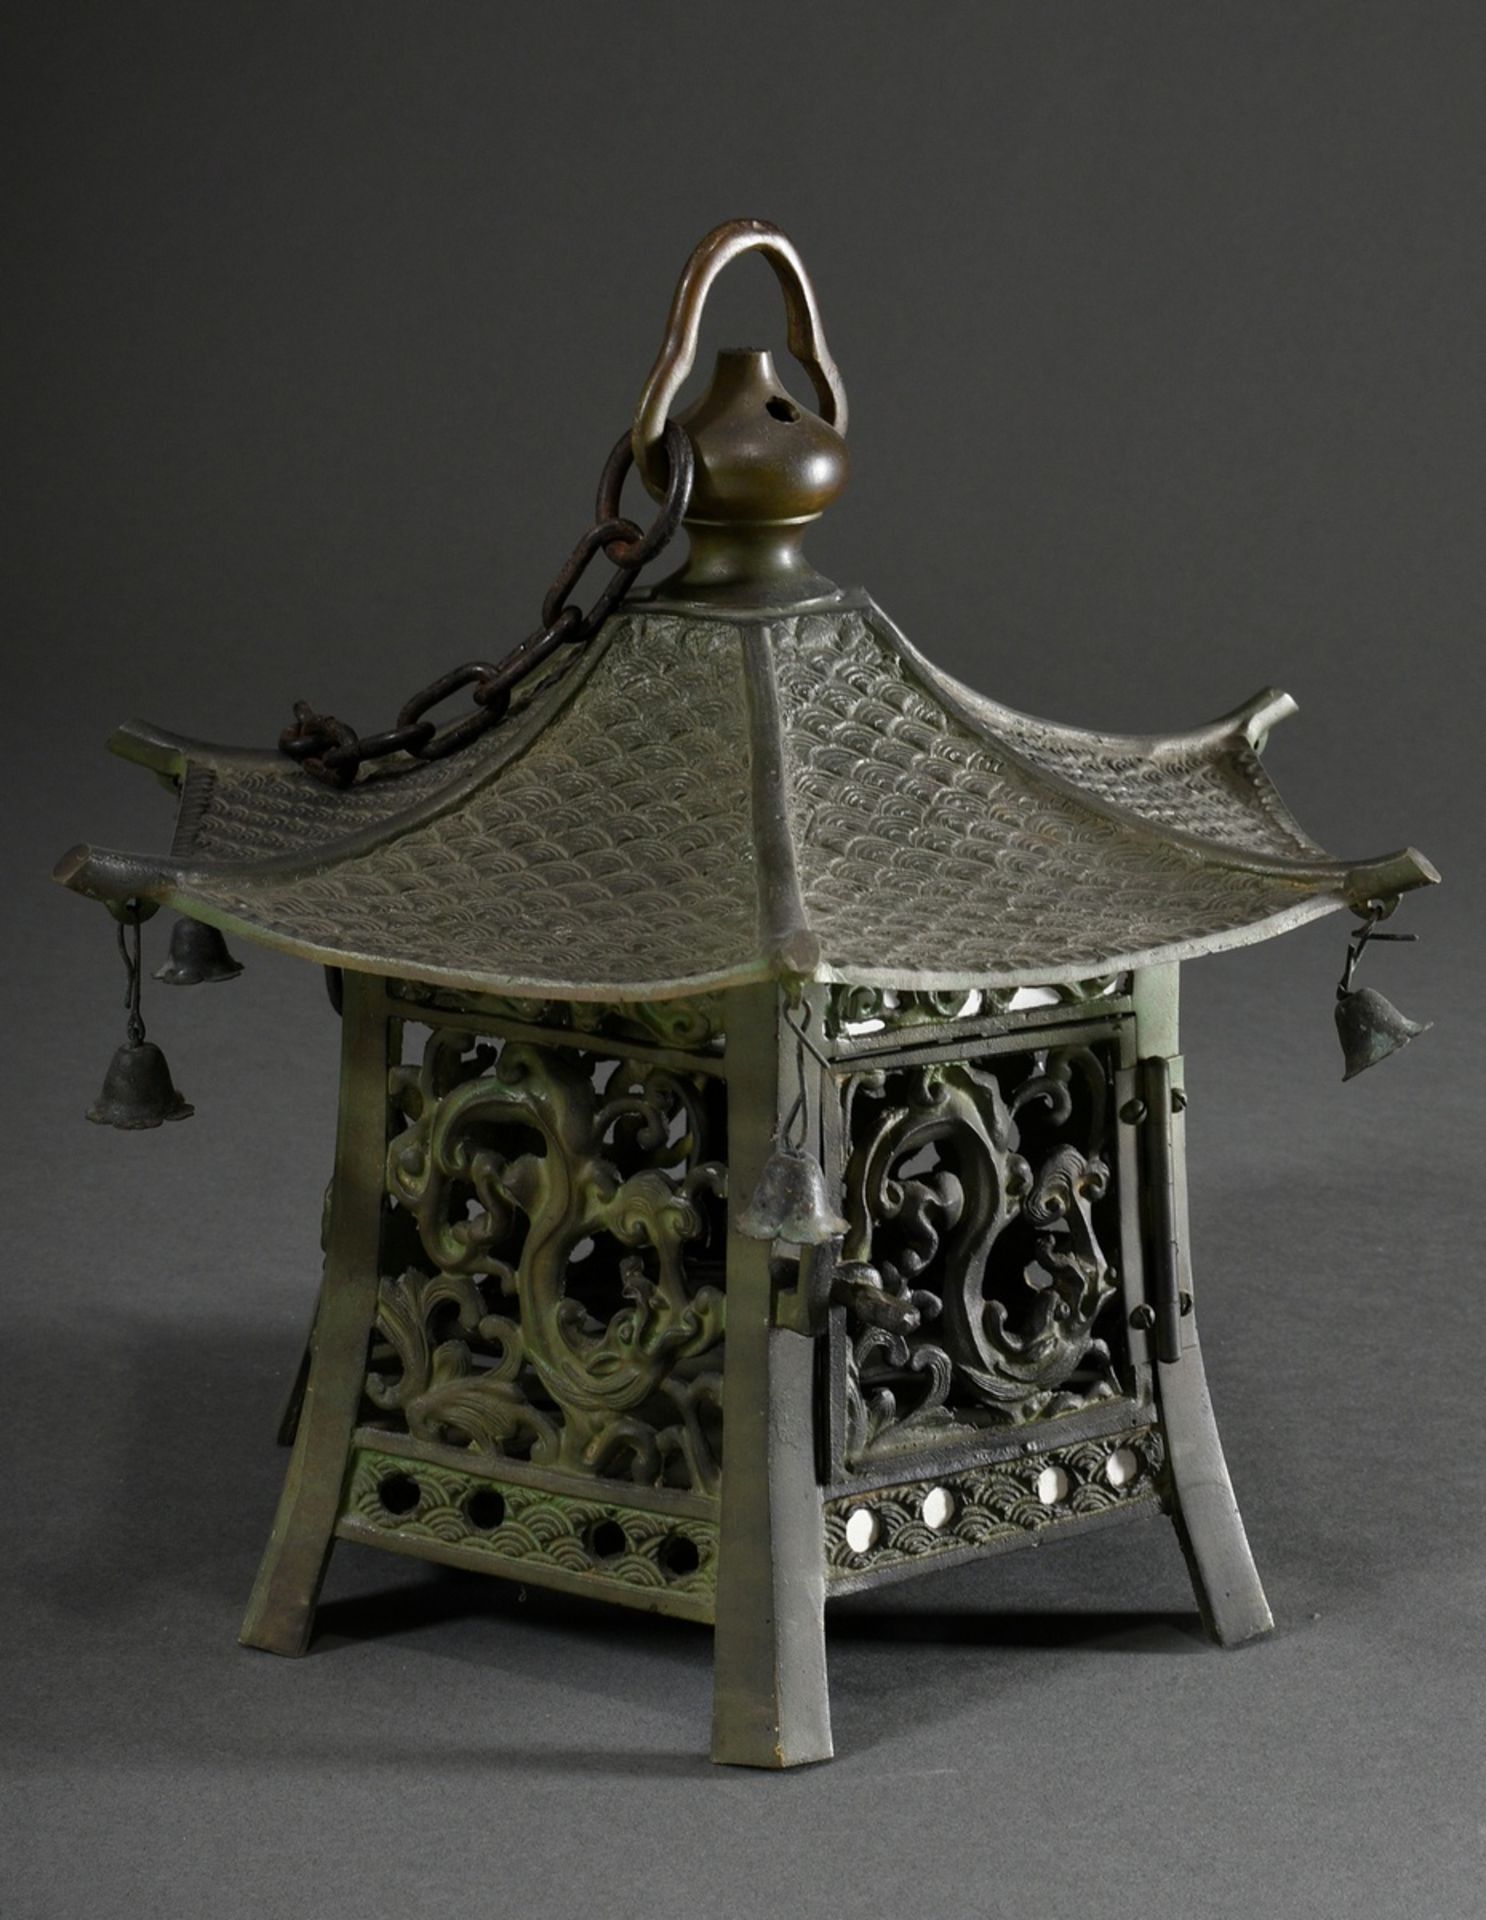 Small hexagonal lantern in the shape of a pagoda with movable bells at the tops of the roofs and "d